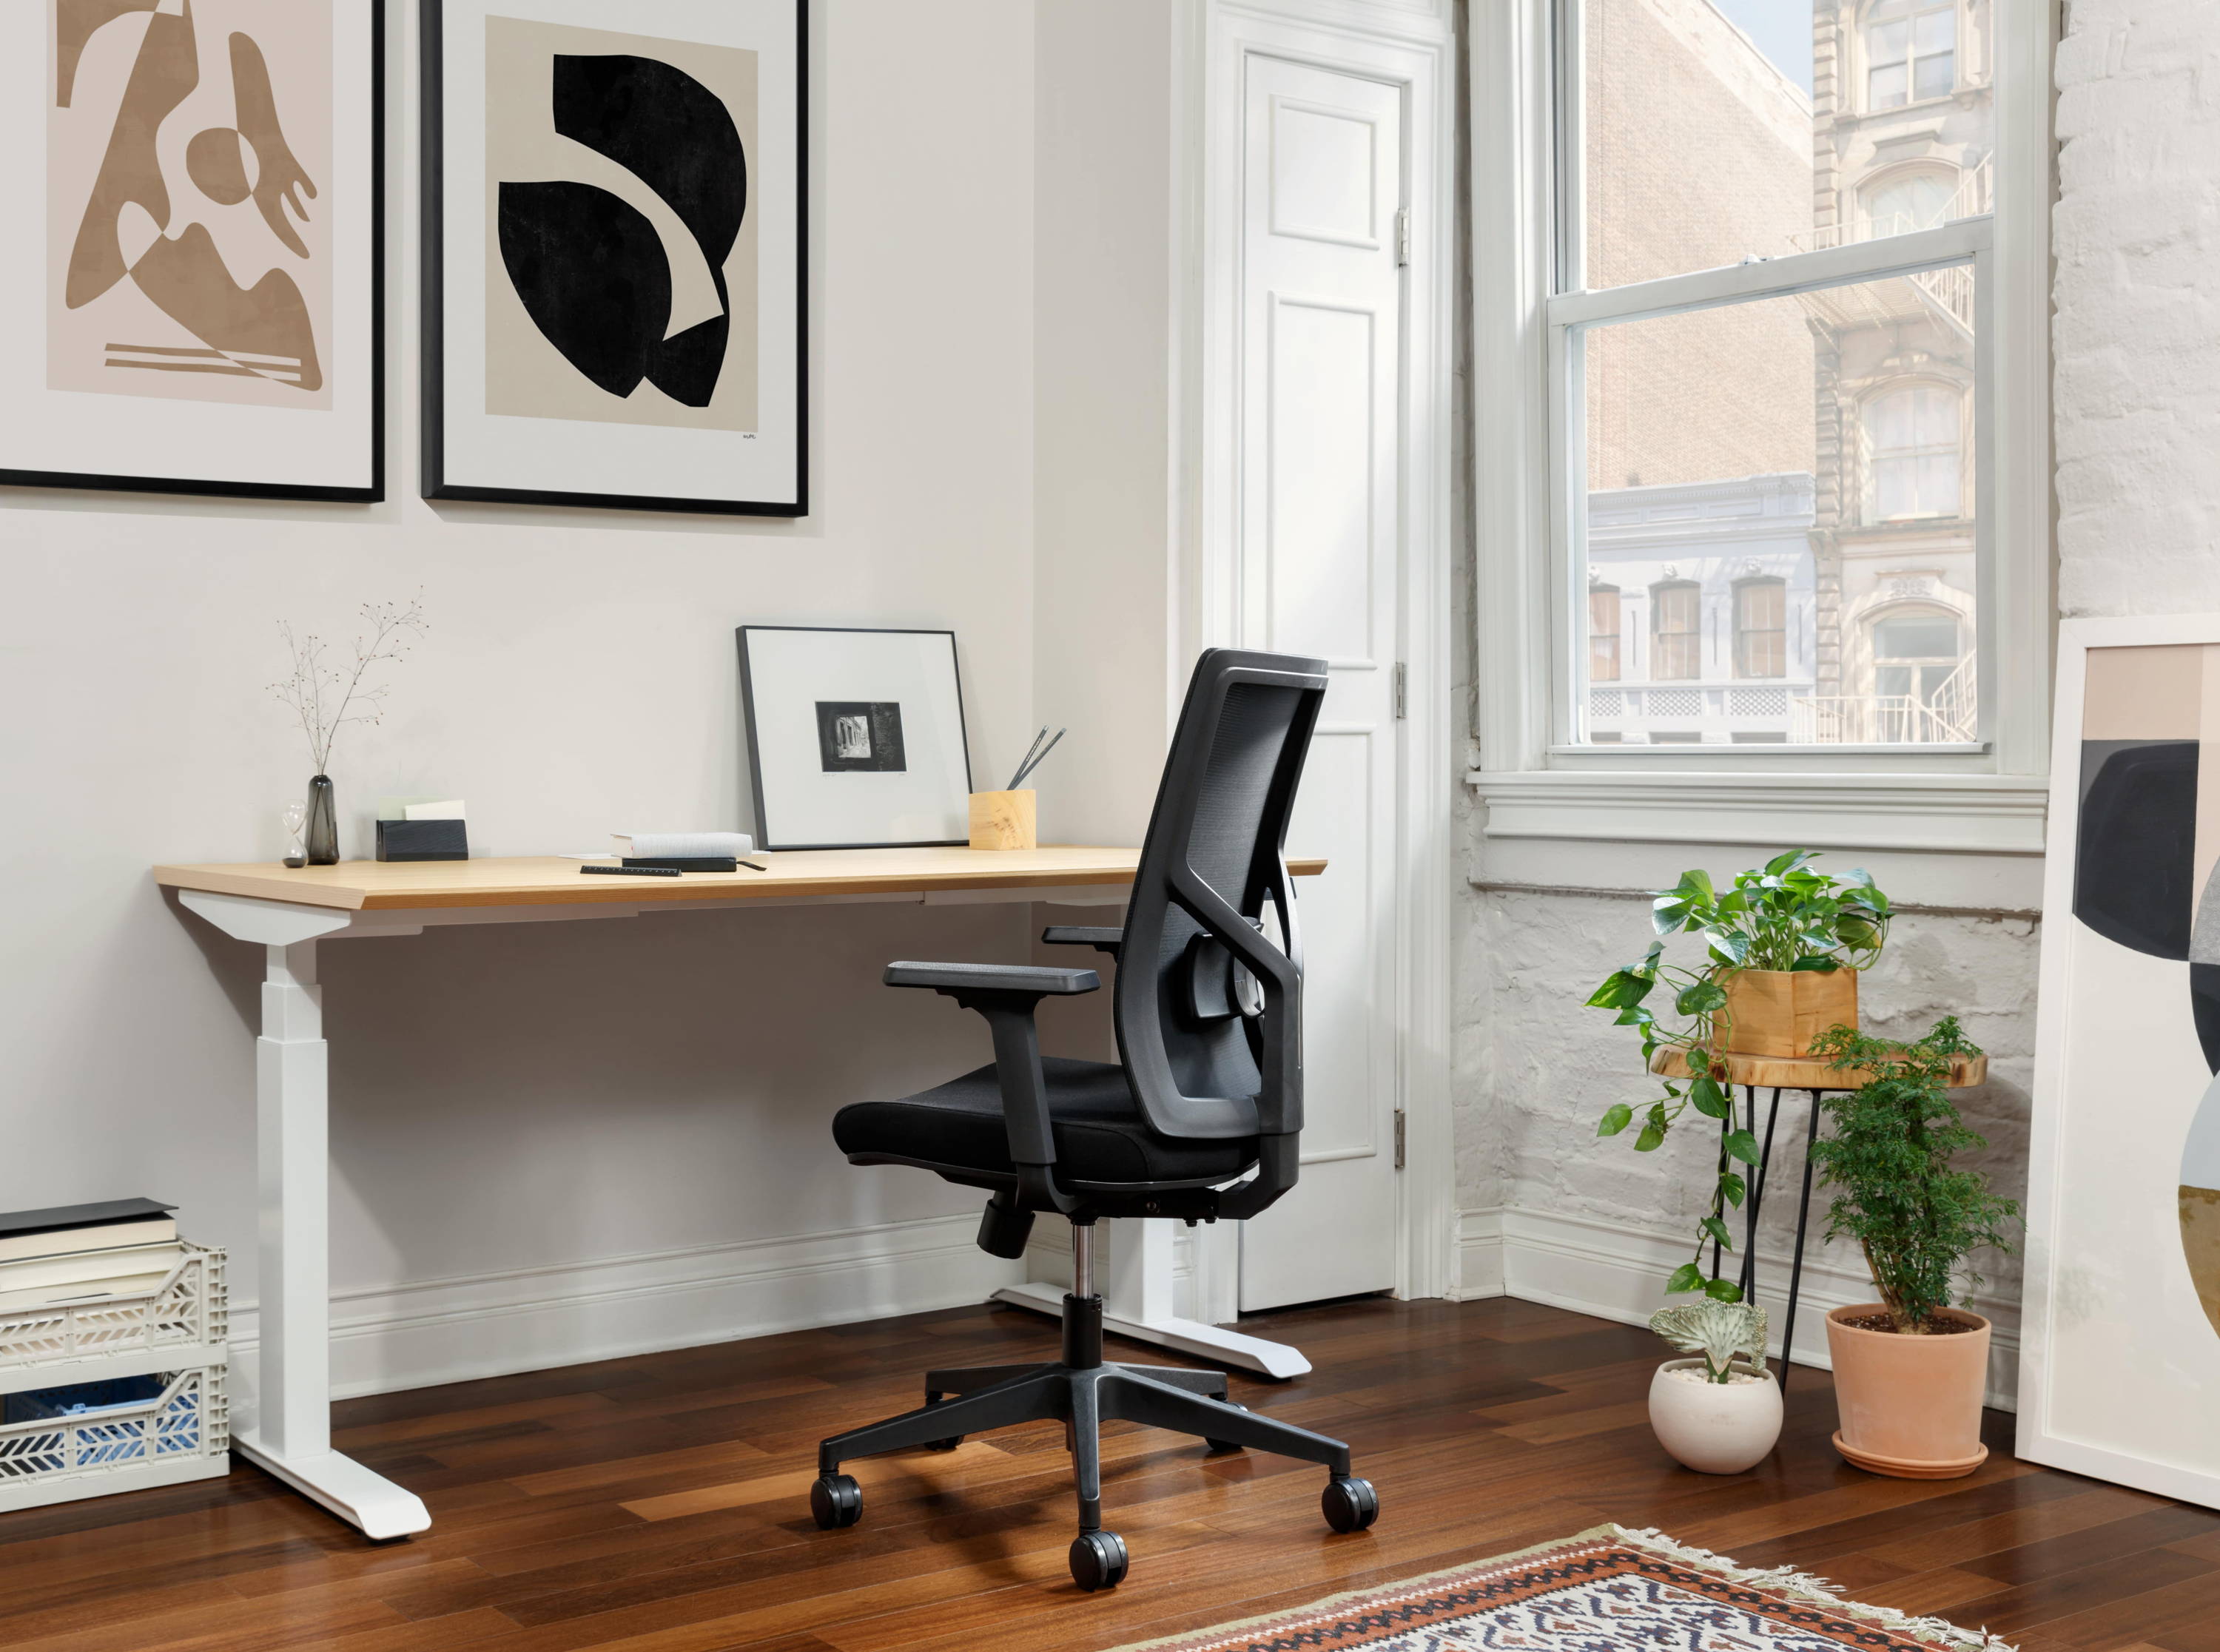 5 of the Best Accessories for an Ergonomic Office Setup